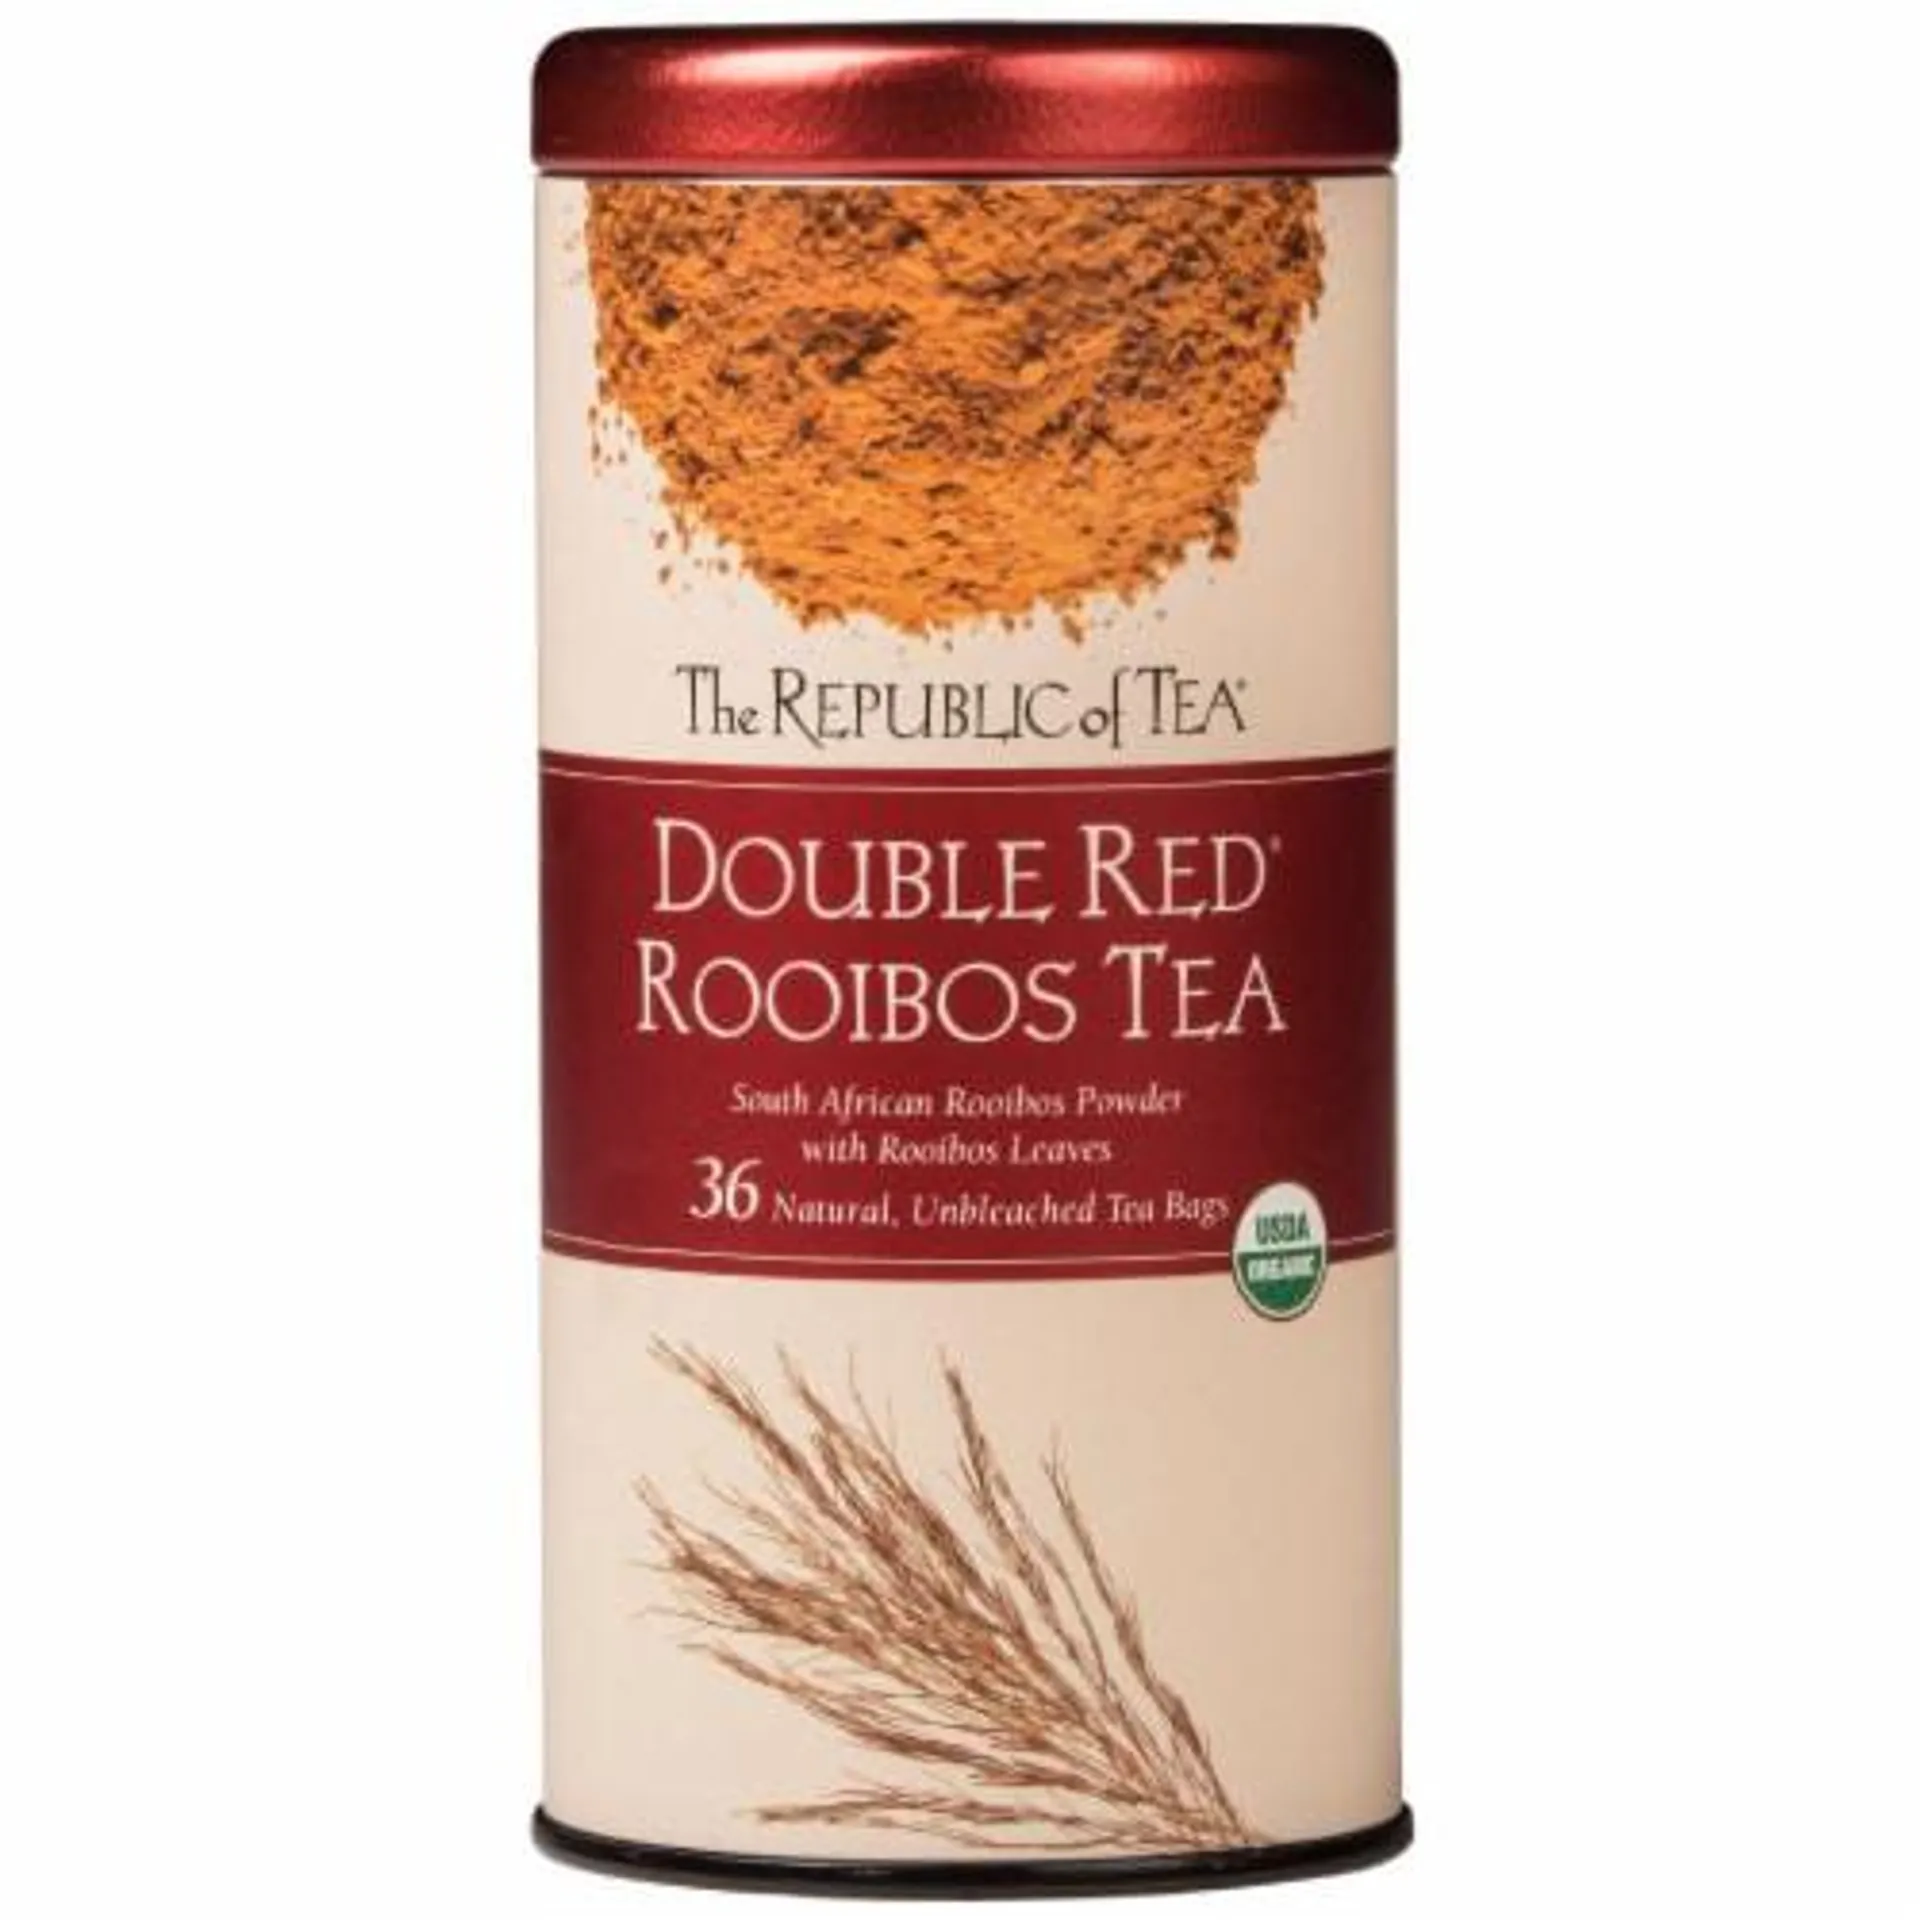 The Republic of Tea Double Red Rooibos Tea Bags